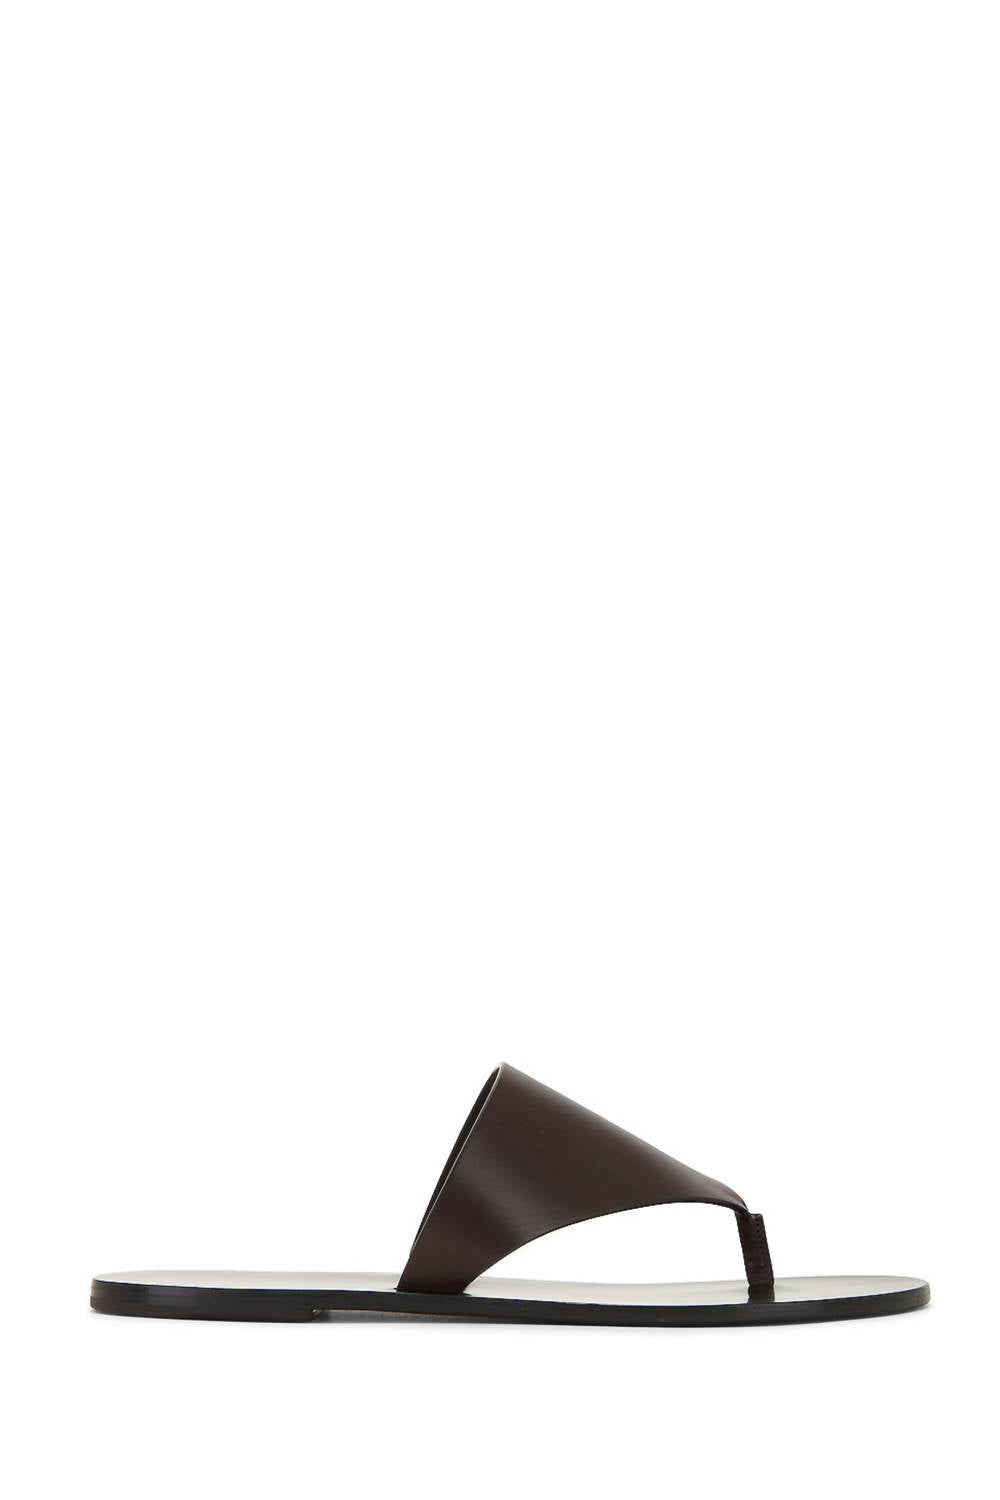 The Row Avery Thong Sandals In Espresso In Black